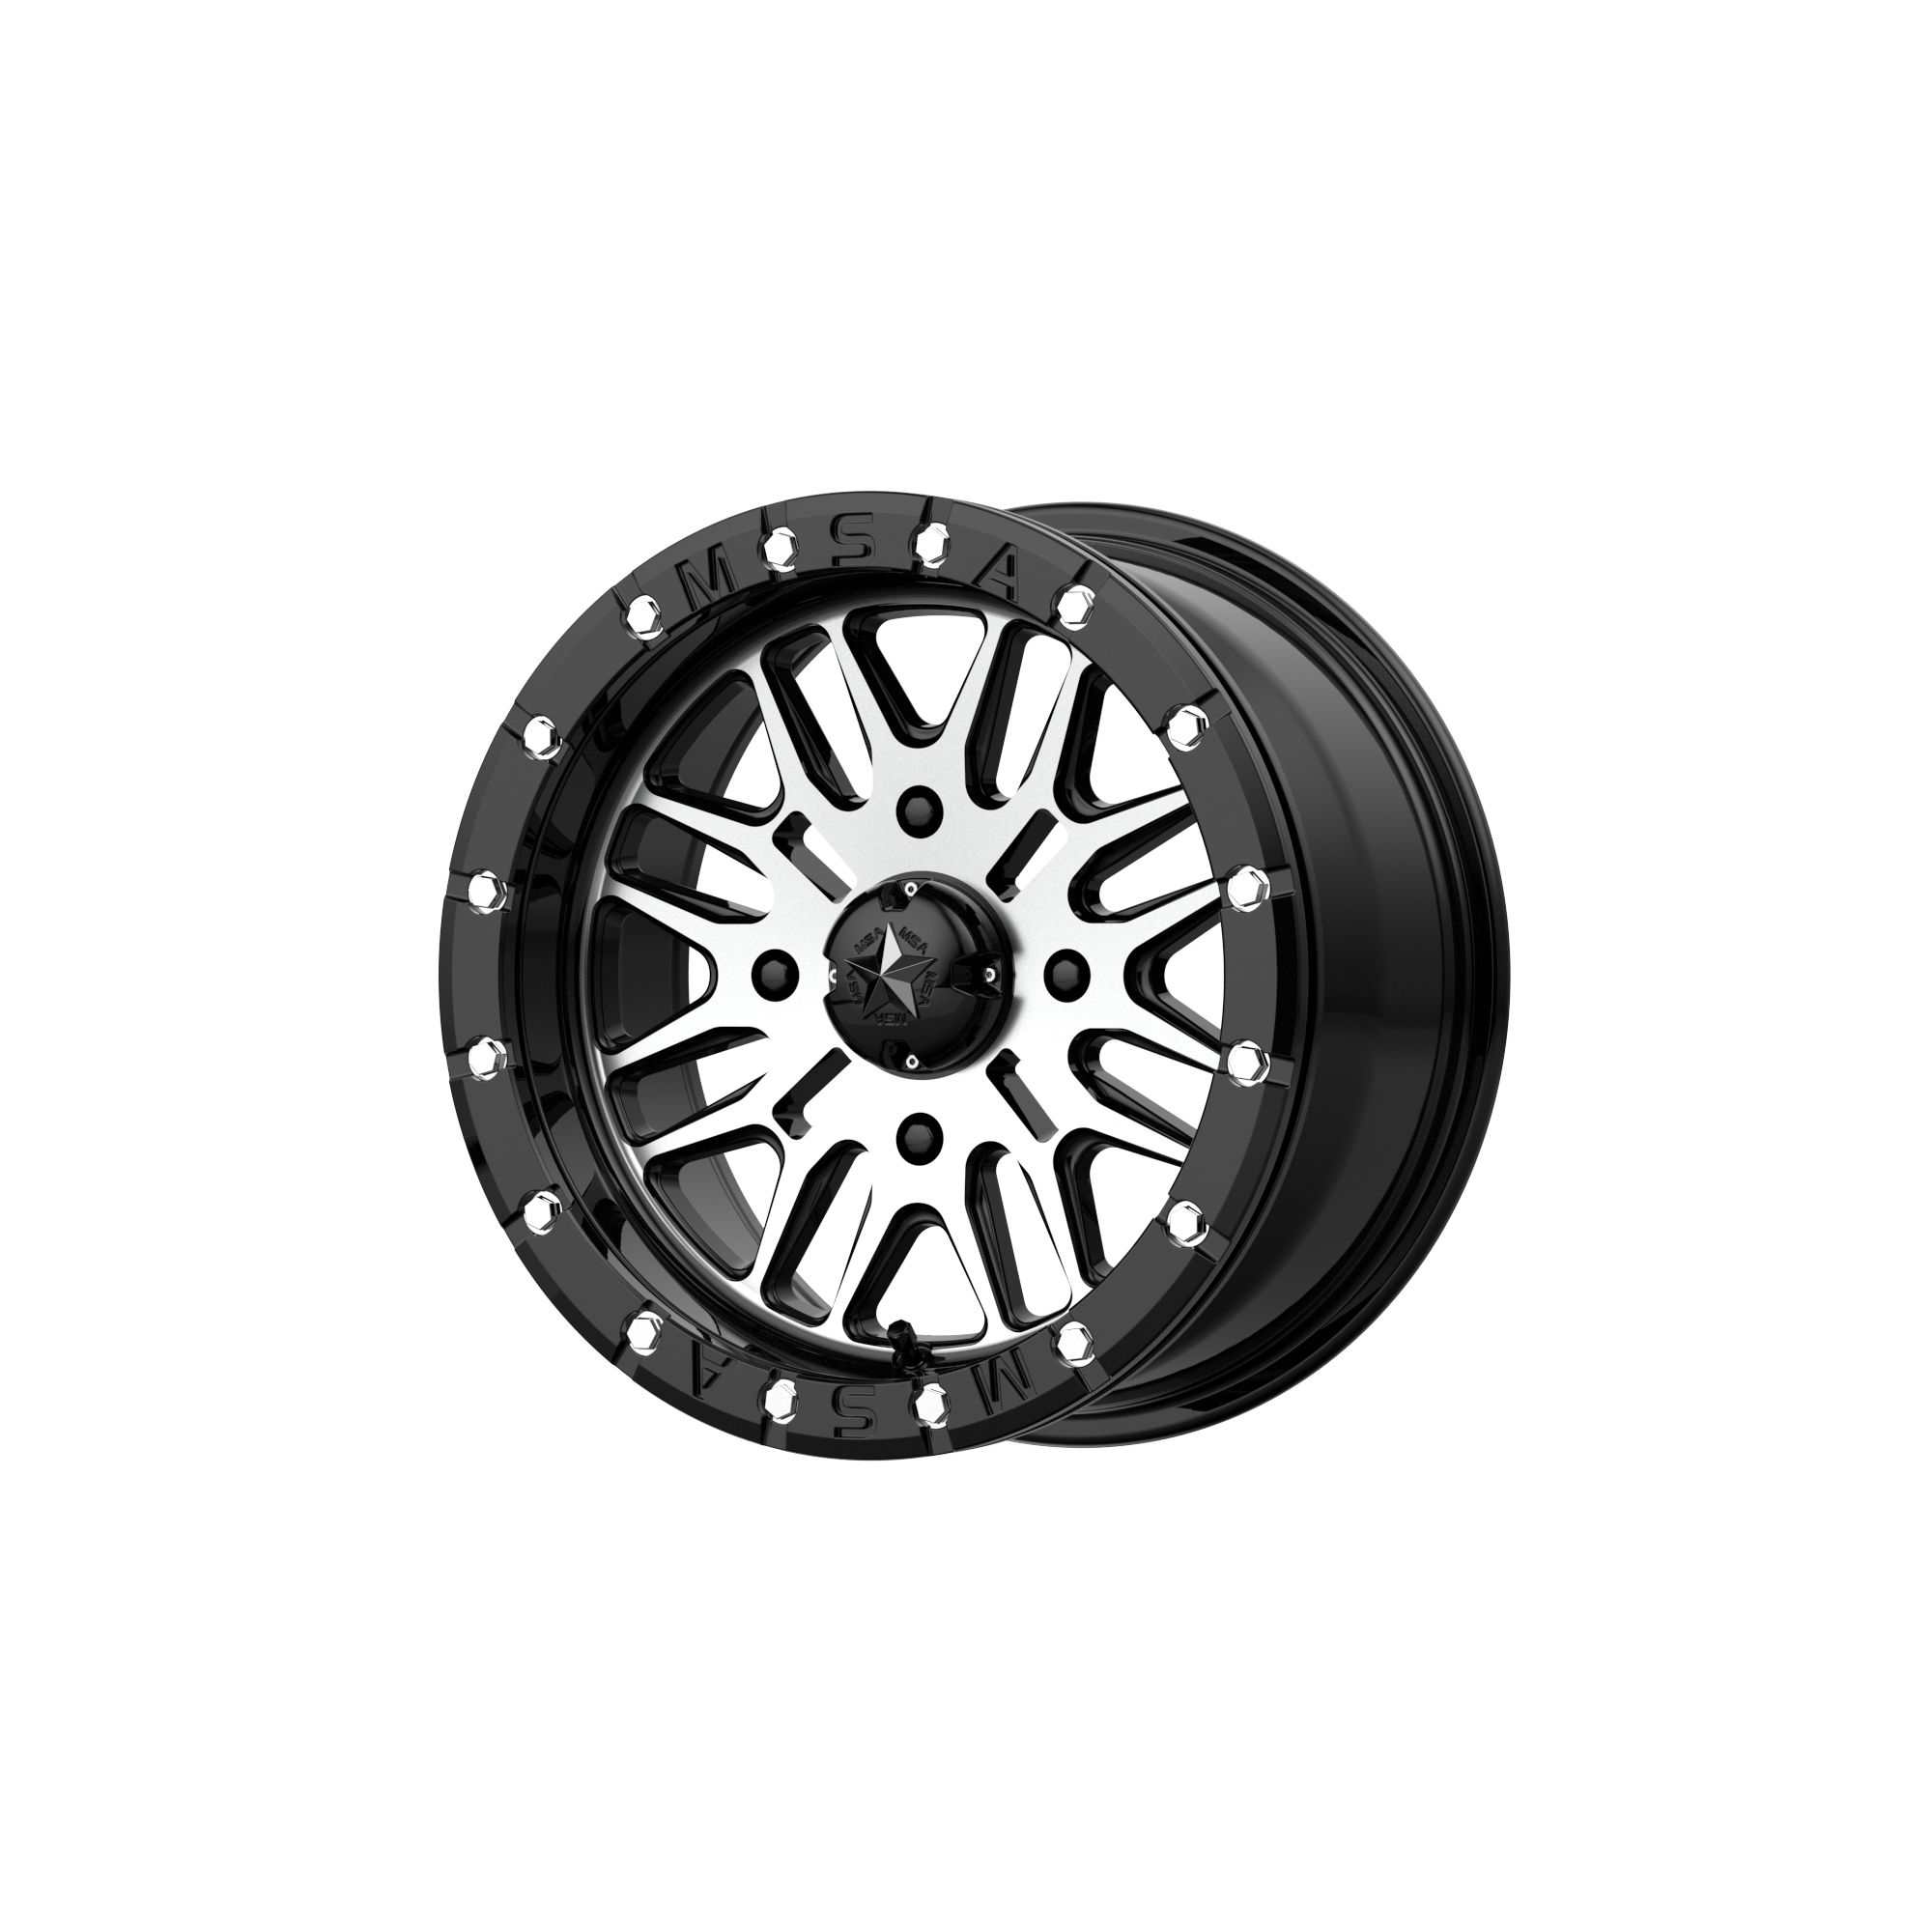 BRUTE BEADLOCK 14x7 4x137.00 GLOSS BLACK MACHINED (10 mm) - Tires and Engine Performance